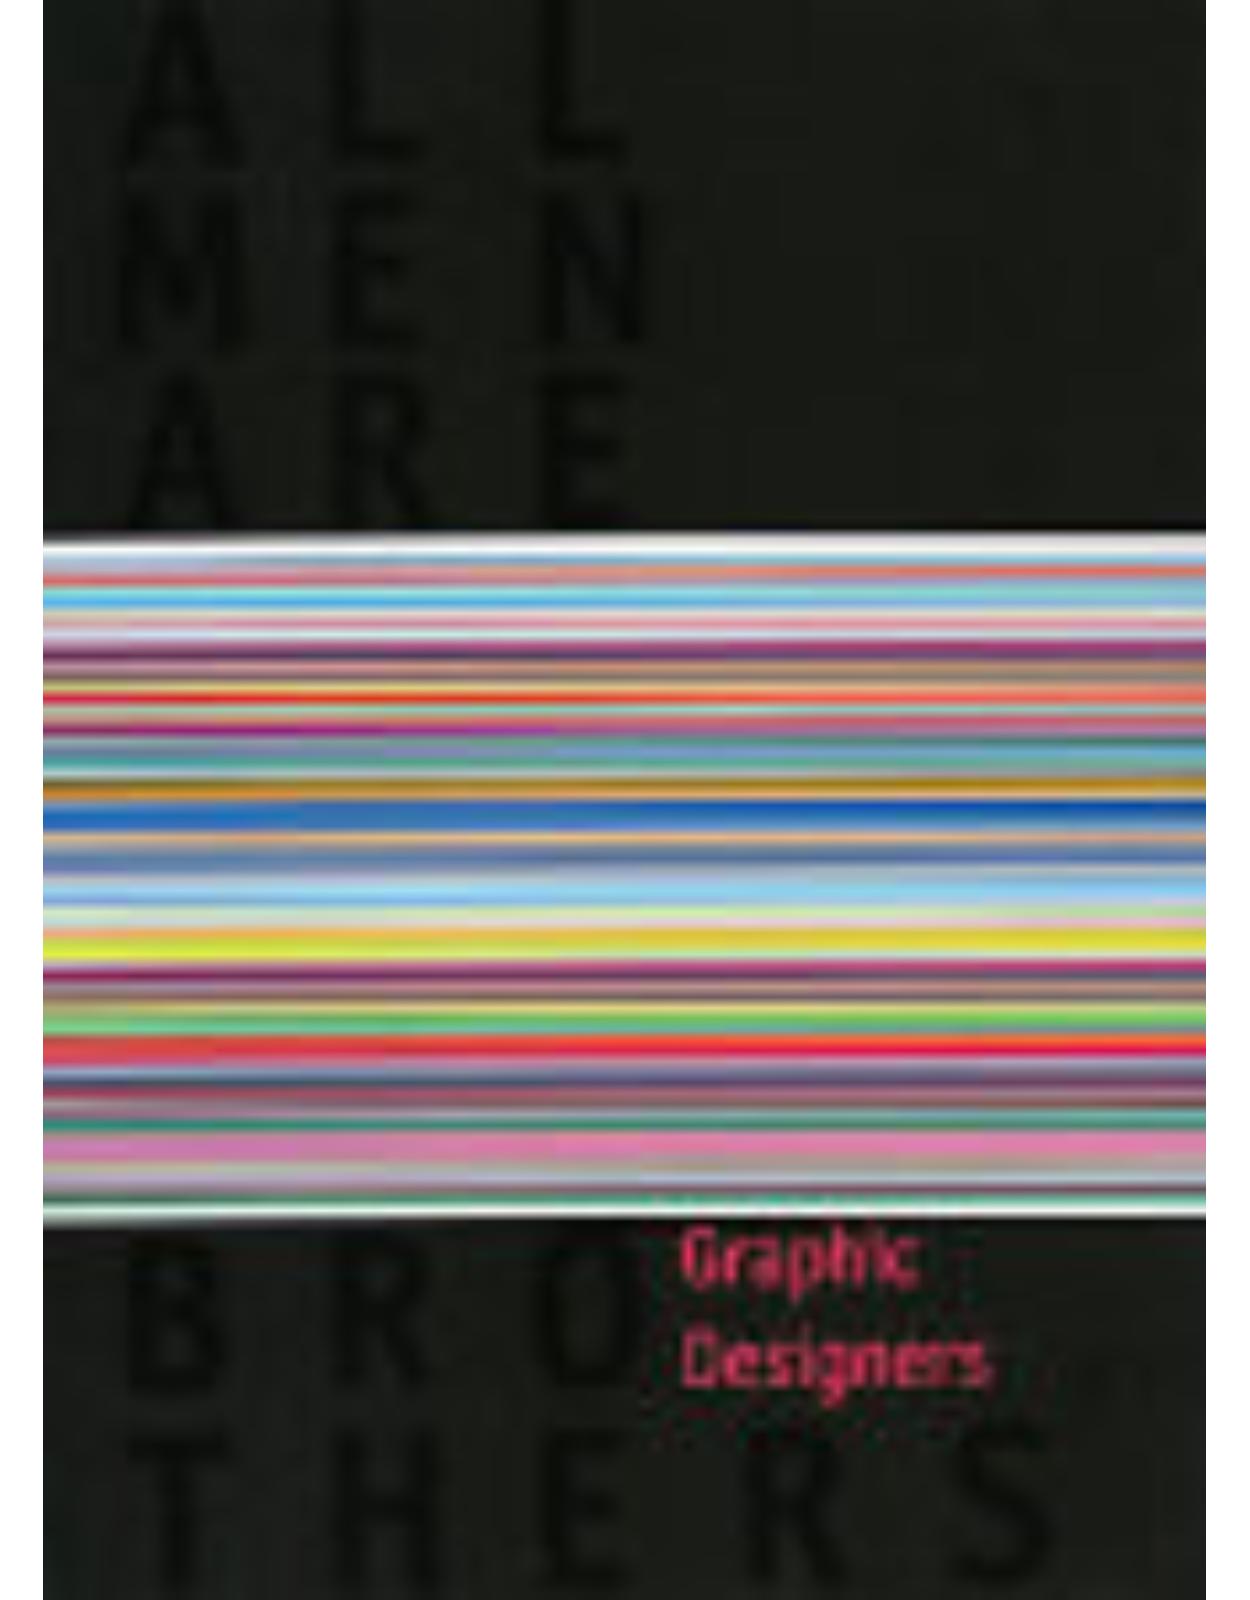 All Men are Brothers - Graphic Designers